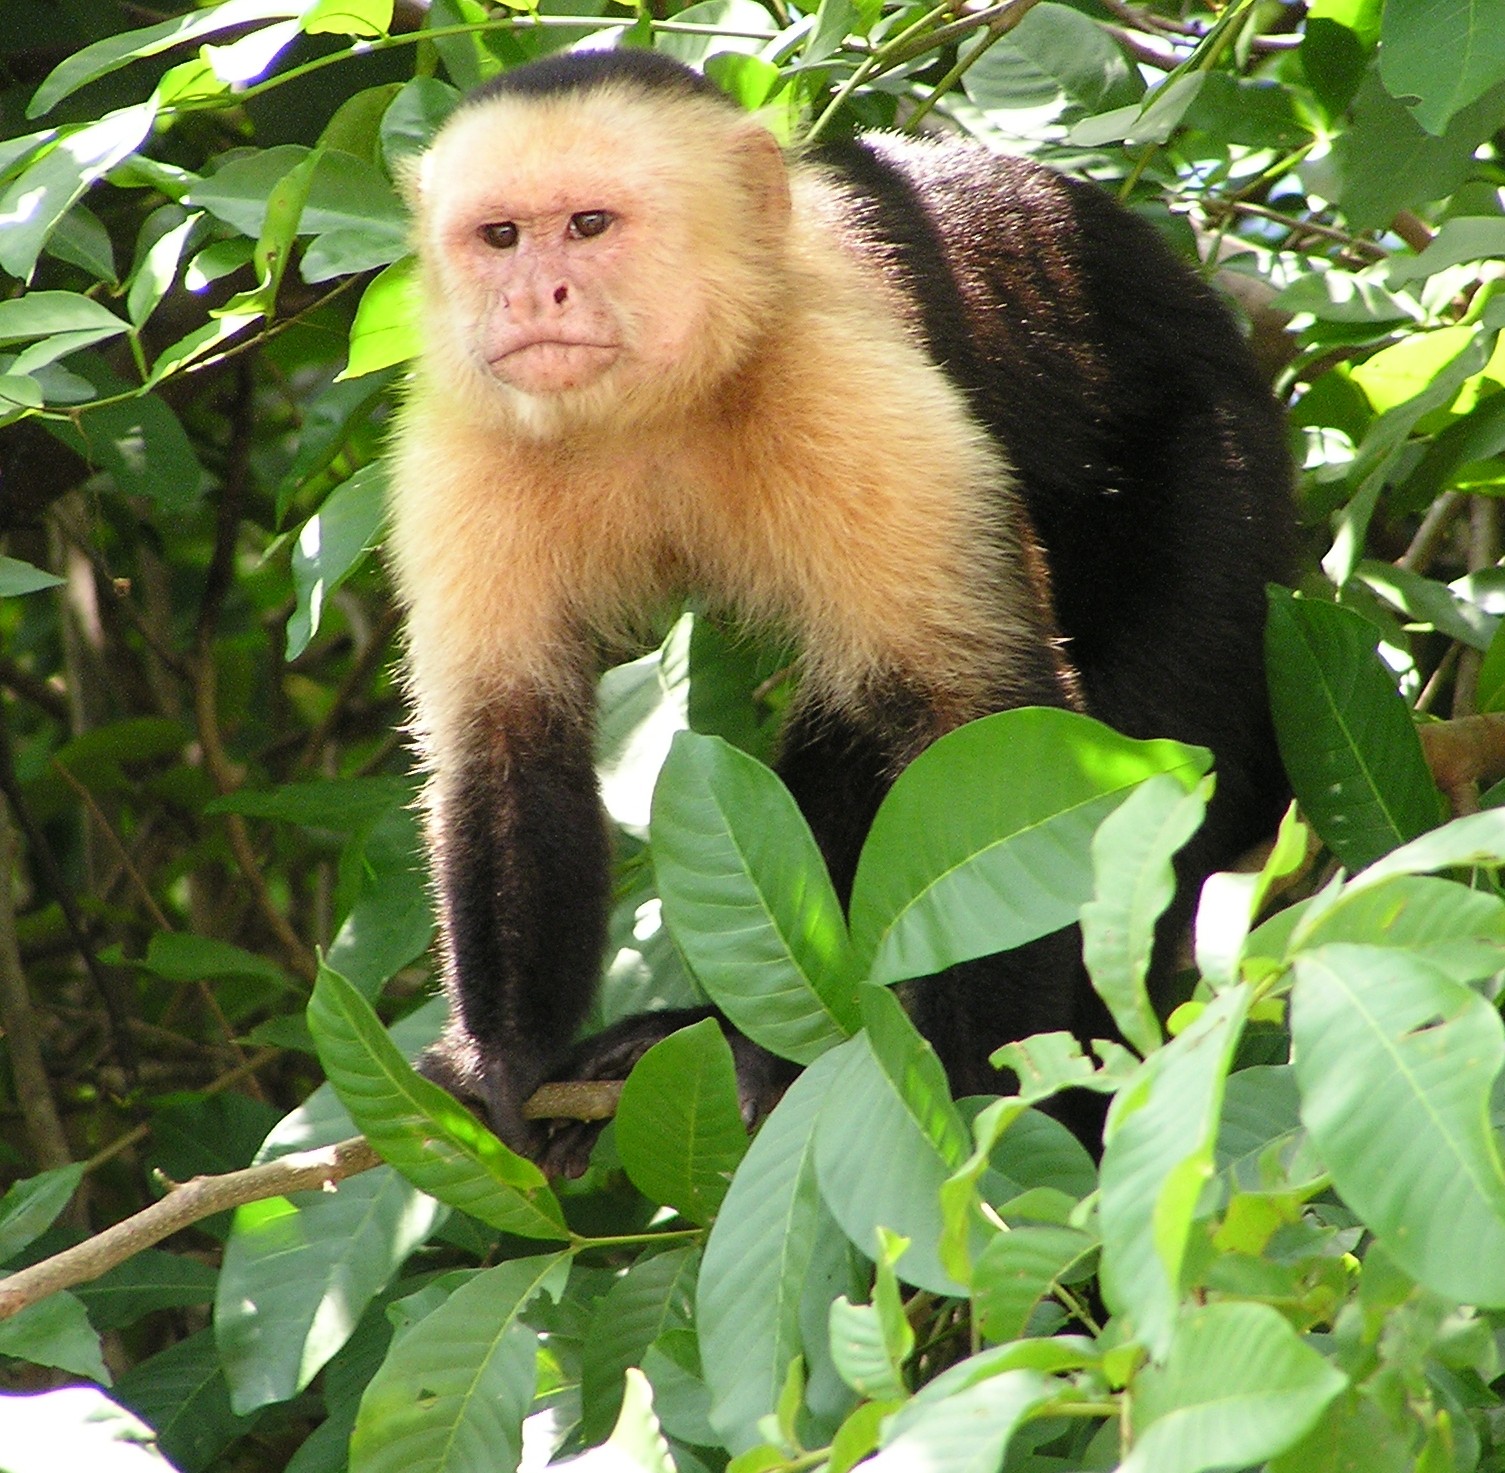 A white-faced capuchin monkey in the forest.